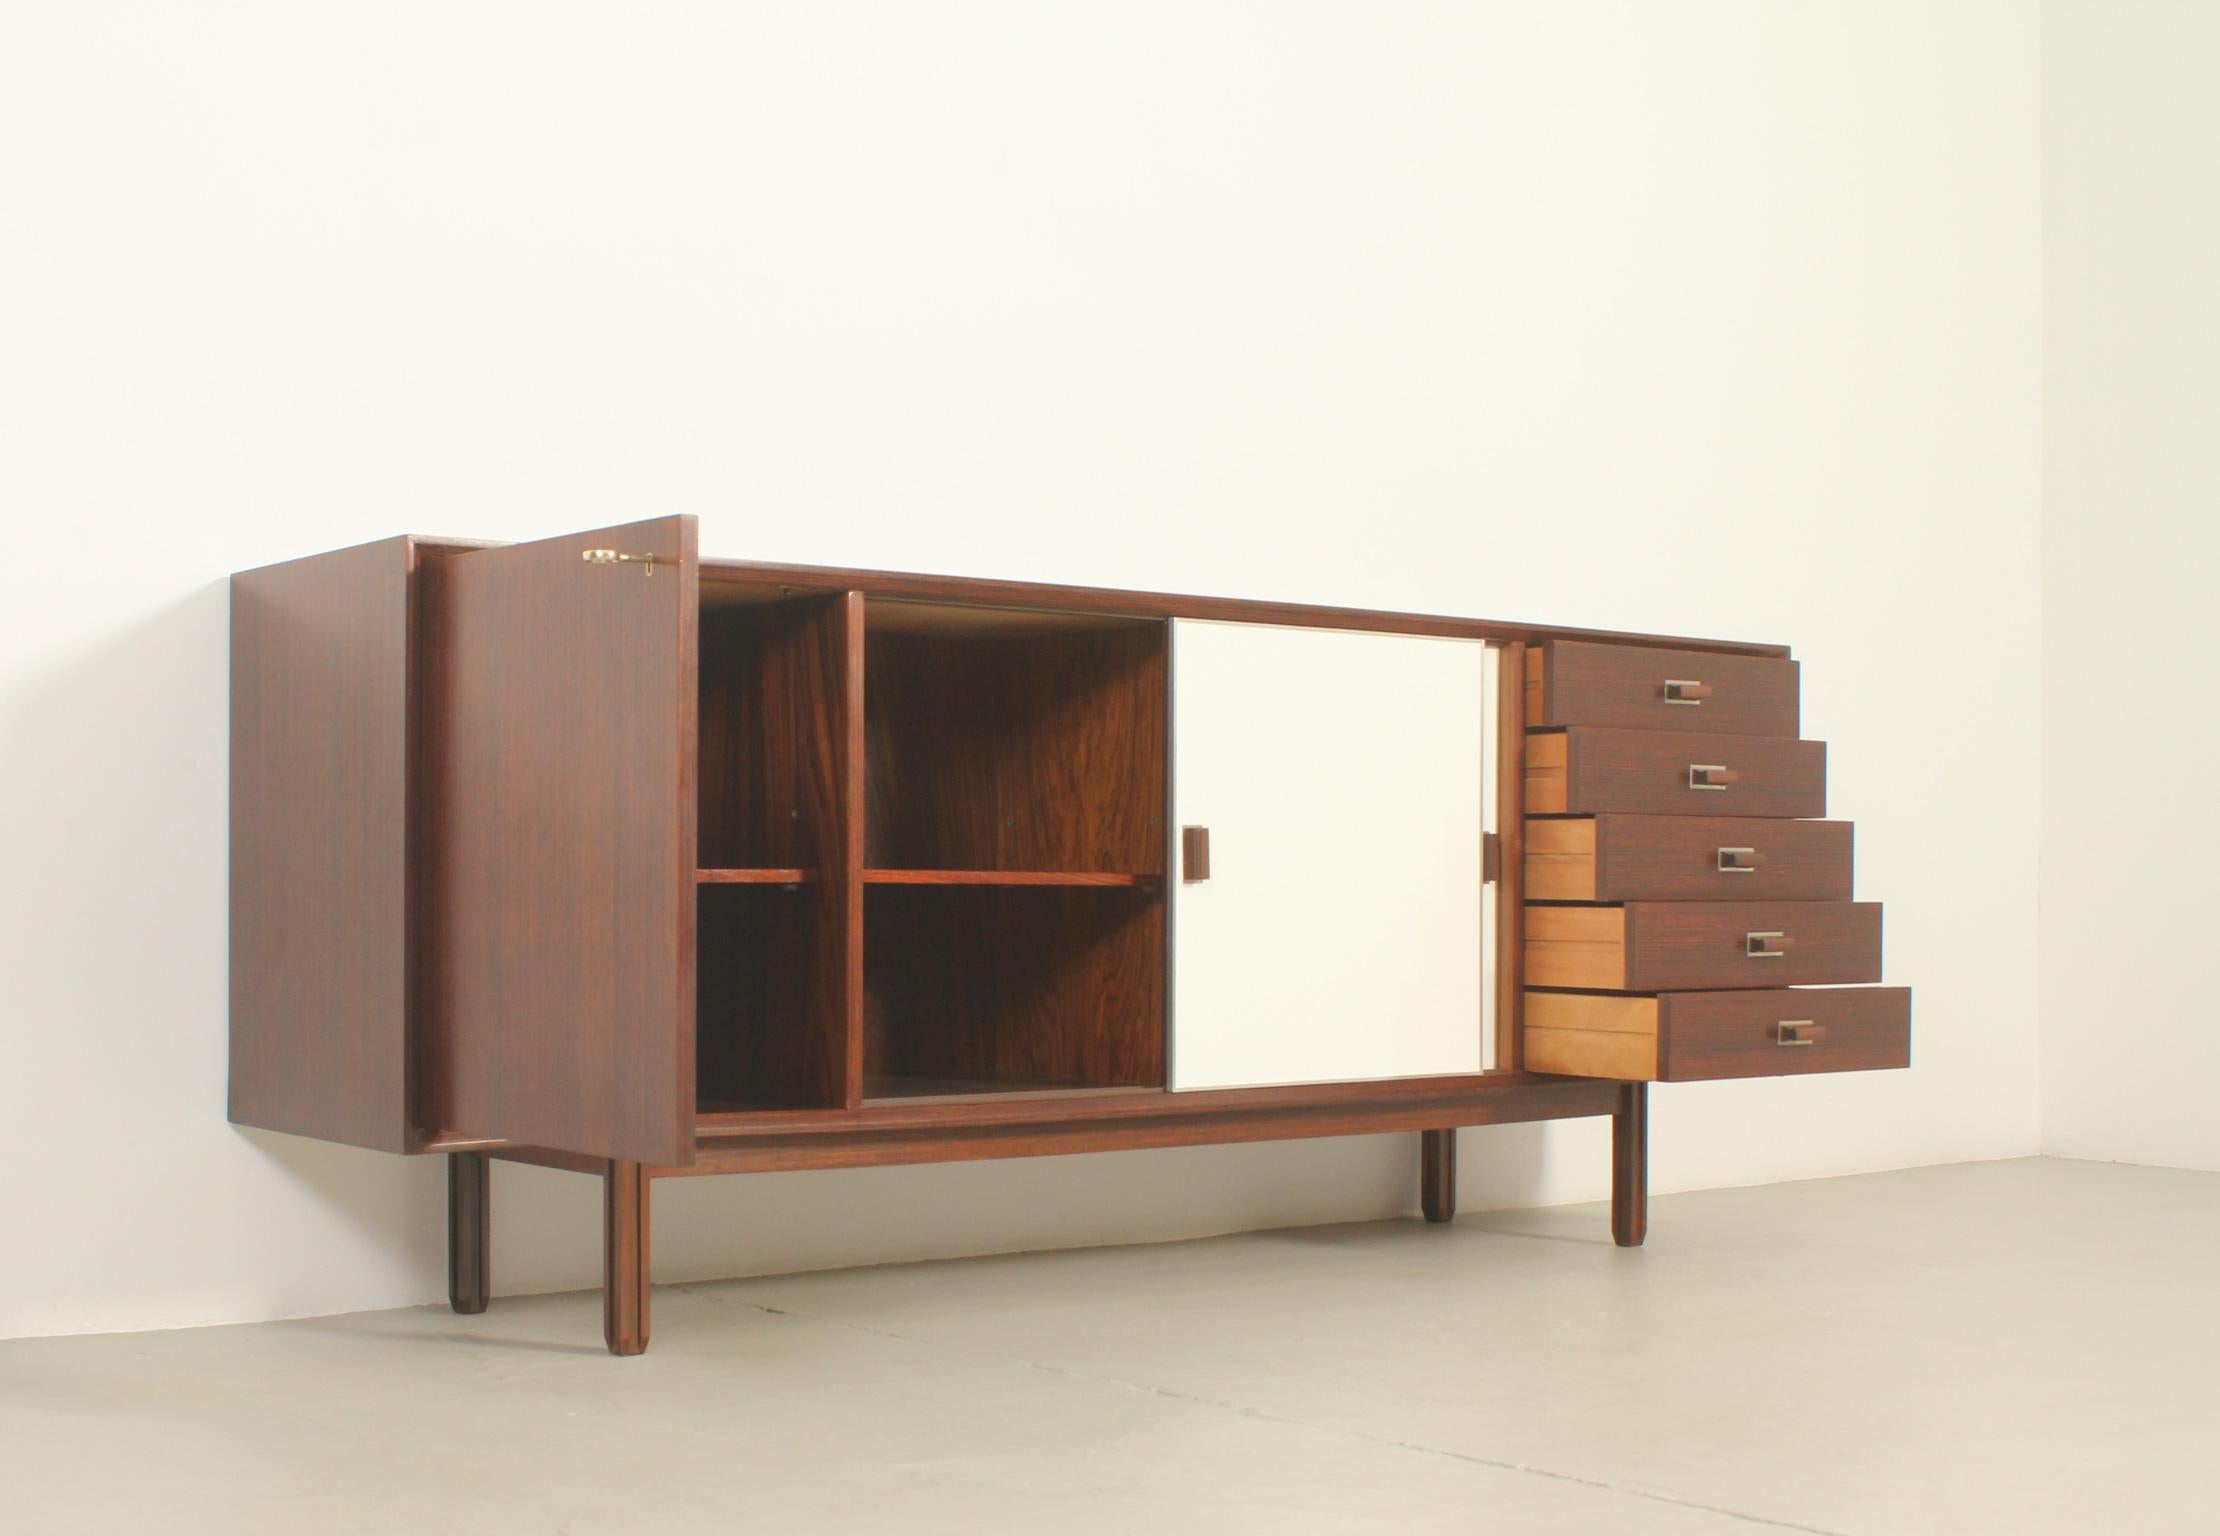 Monika Sideboard by George Coslin for Faram, Italy, 1960's For Sale 6